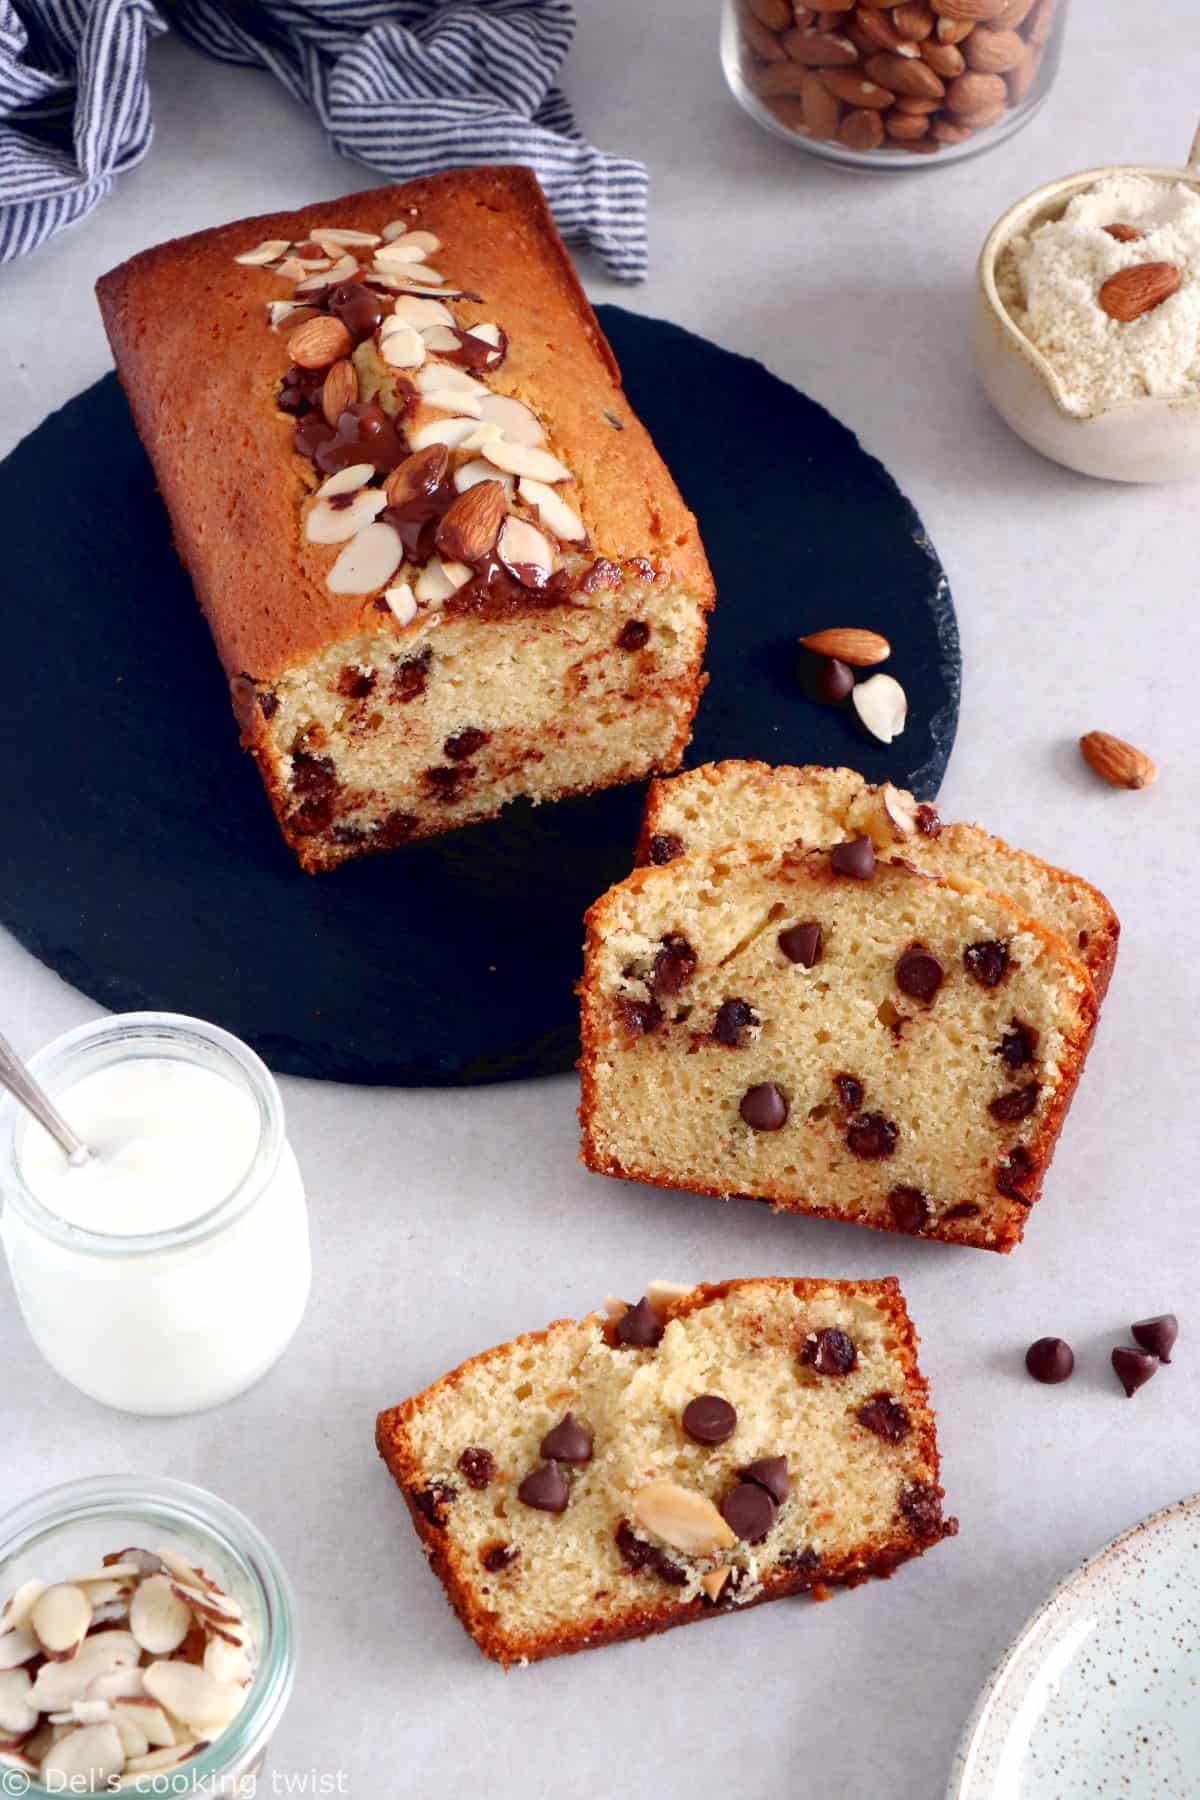 This simple chocolate chip almond yogurt cake makes a wonderful coffee cake for every occasion.